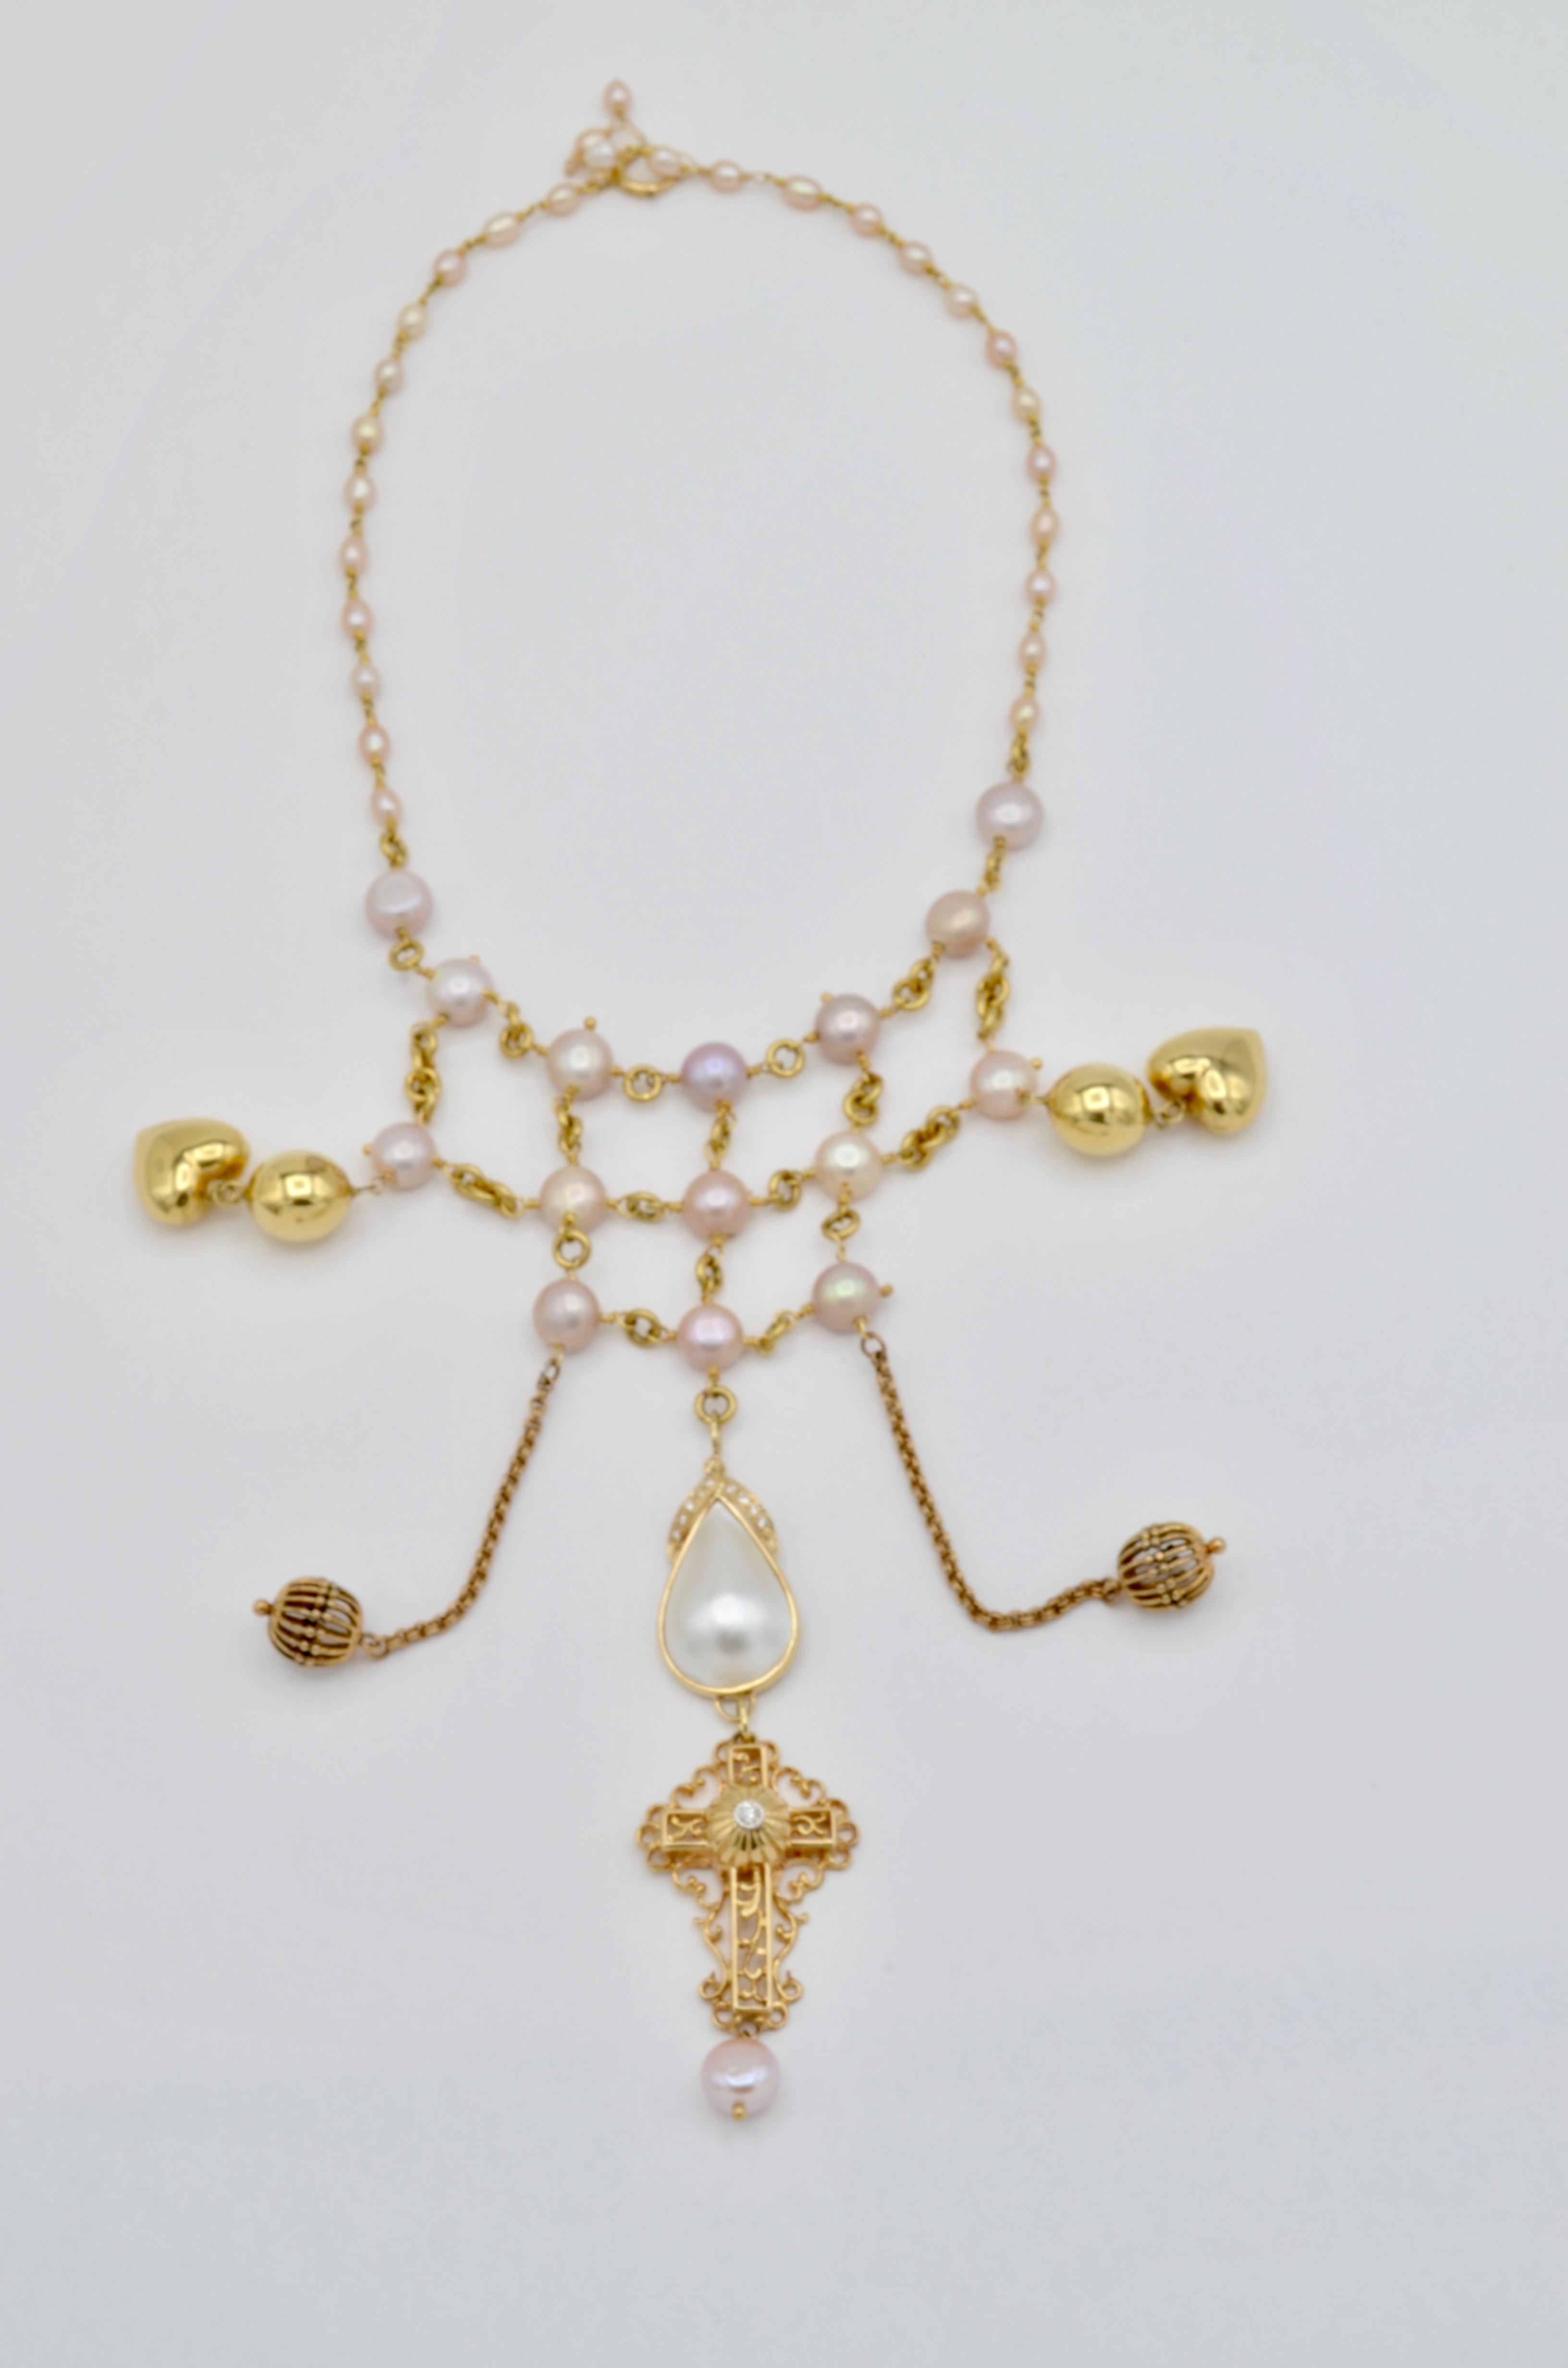 Round Cut Gold Pearl Necklace Pearls Mabe Diamond Cross